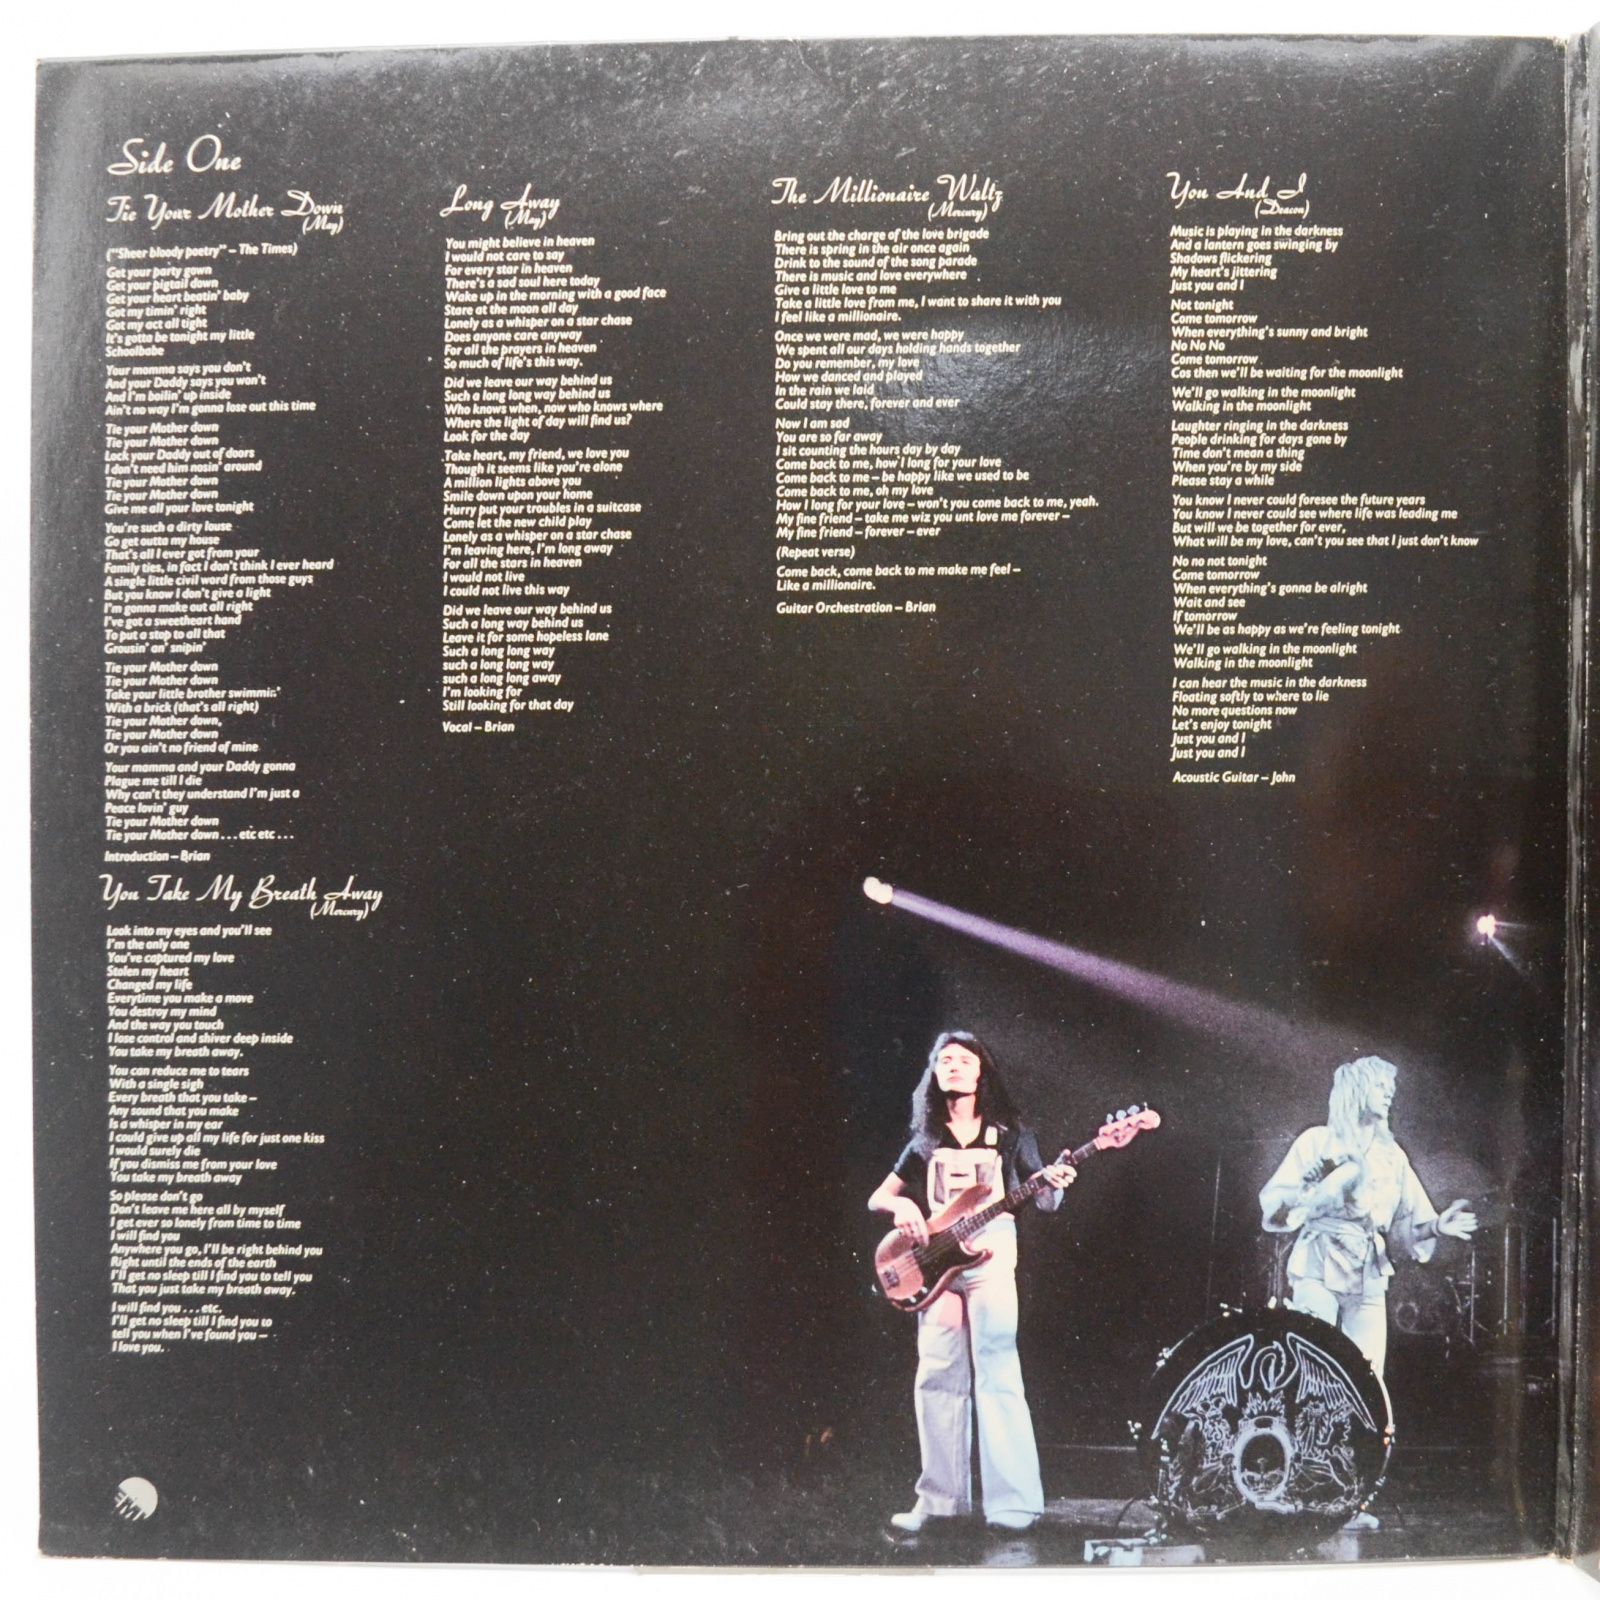 Queen — A Day At The Races, 1976